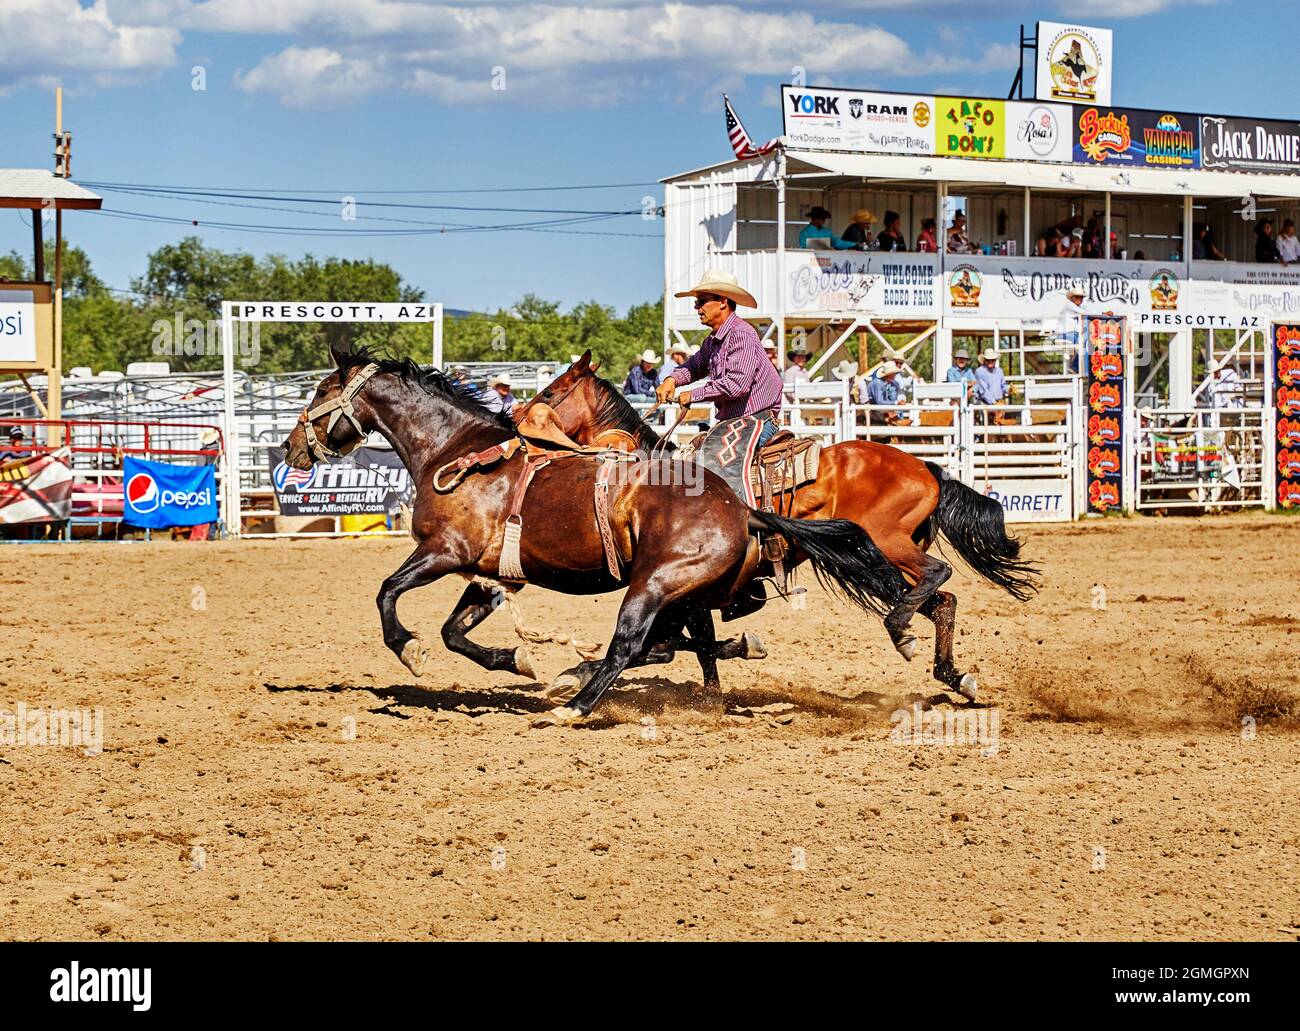 Prescott, Arizona, USA - September 12, 2021: Cowboy riding on a horse while trying to catch a bucking horse  at the rodeo competition held at the Pres Stock Photo